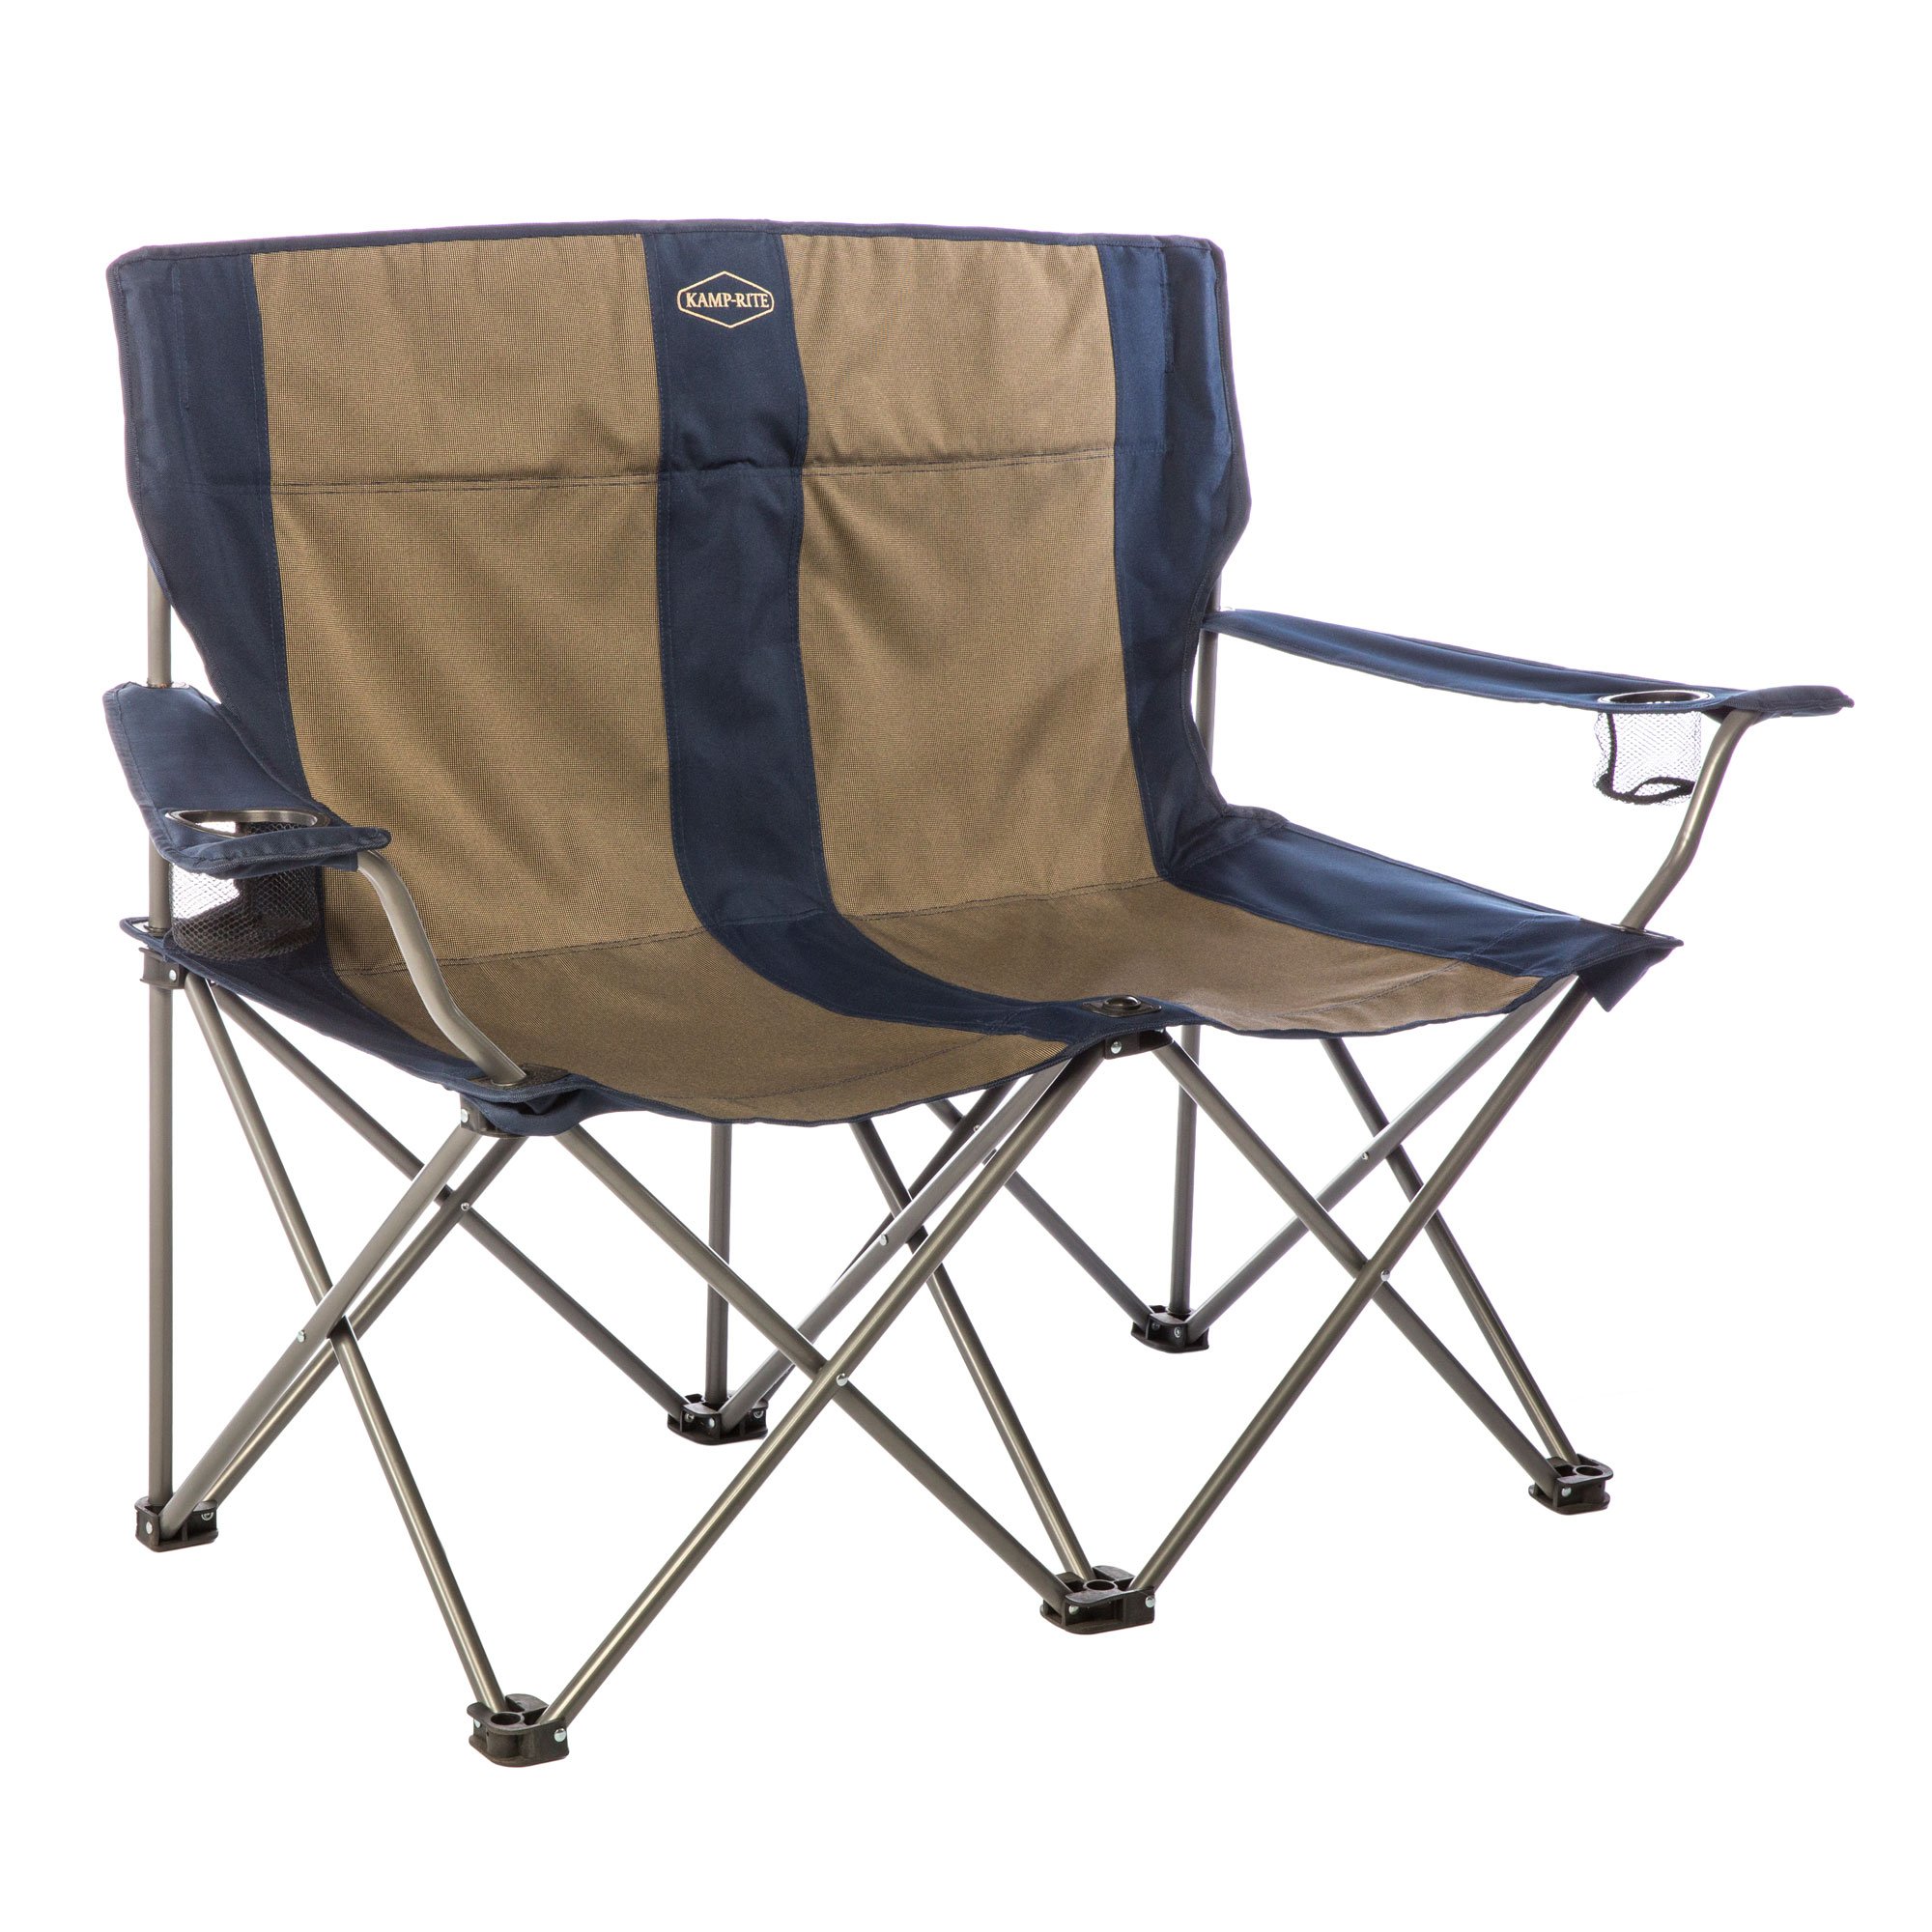 Kamp Rite CC352 2 Person Outdoor Tailgating Camping Double Folding